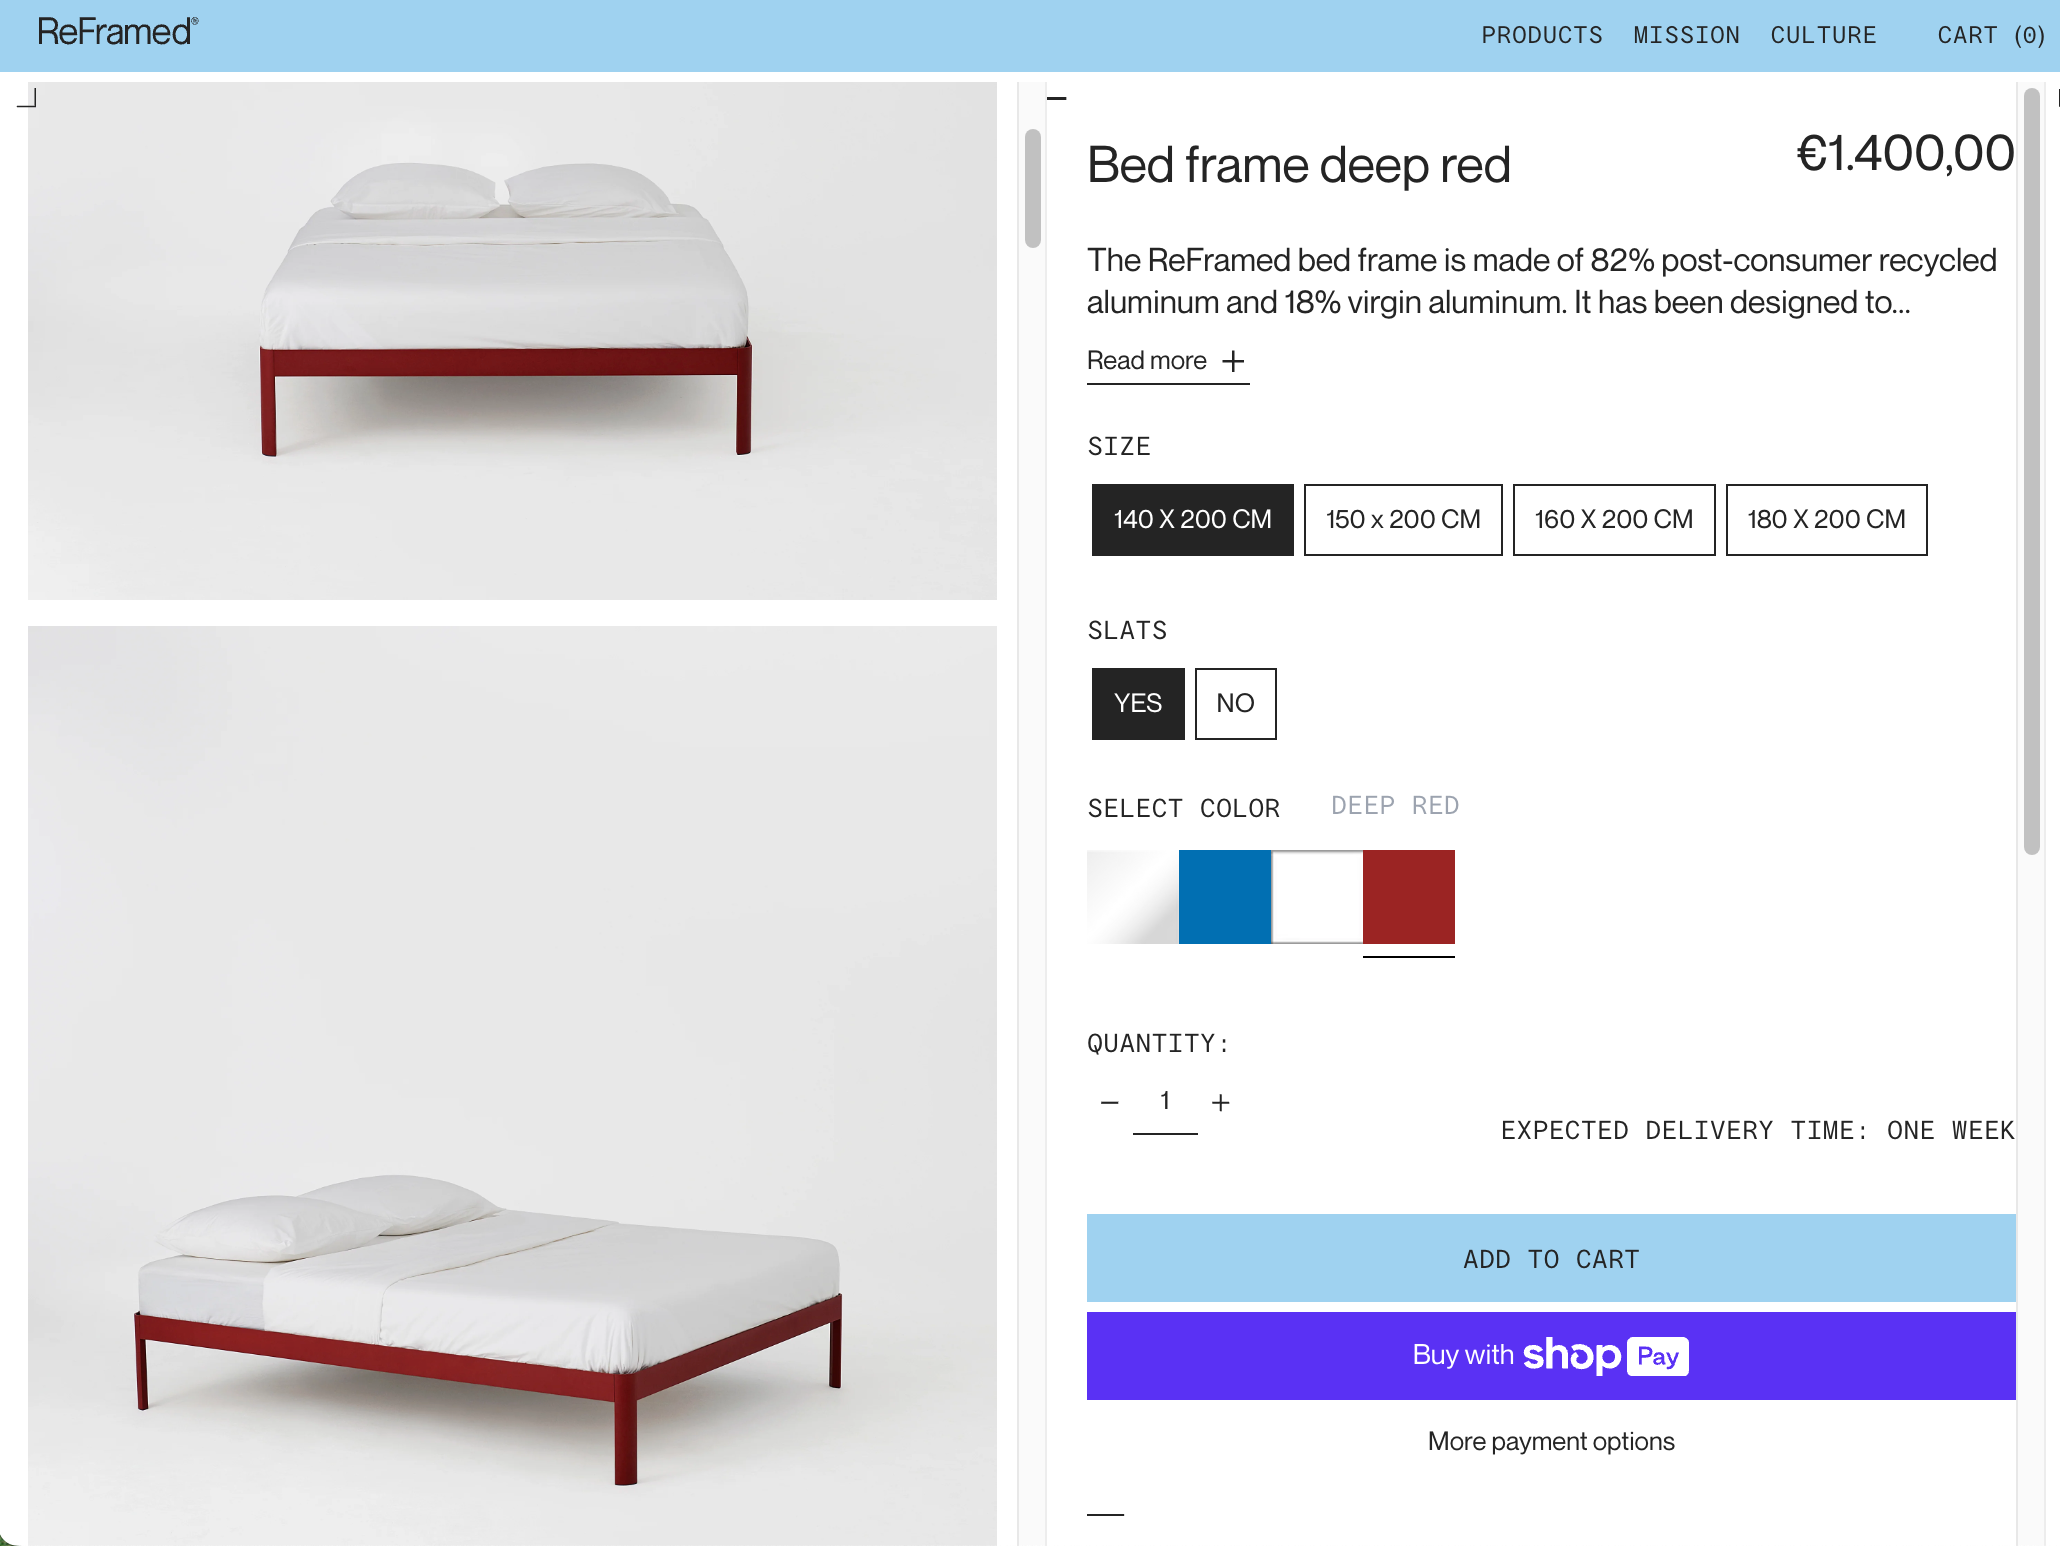 An ecommerce product page from the online store of Reframed